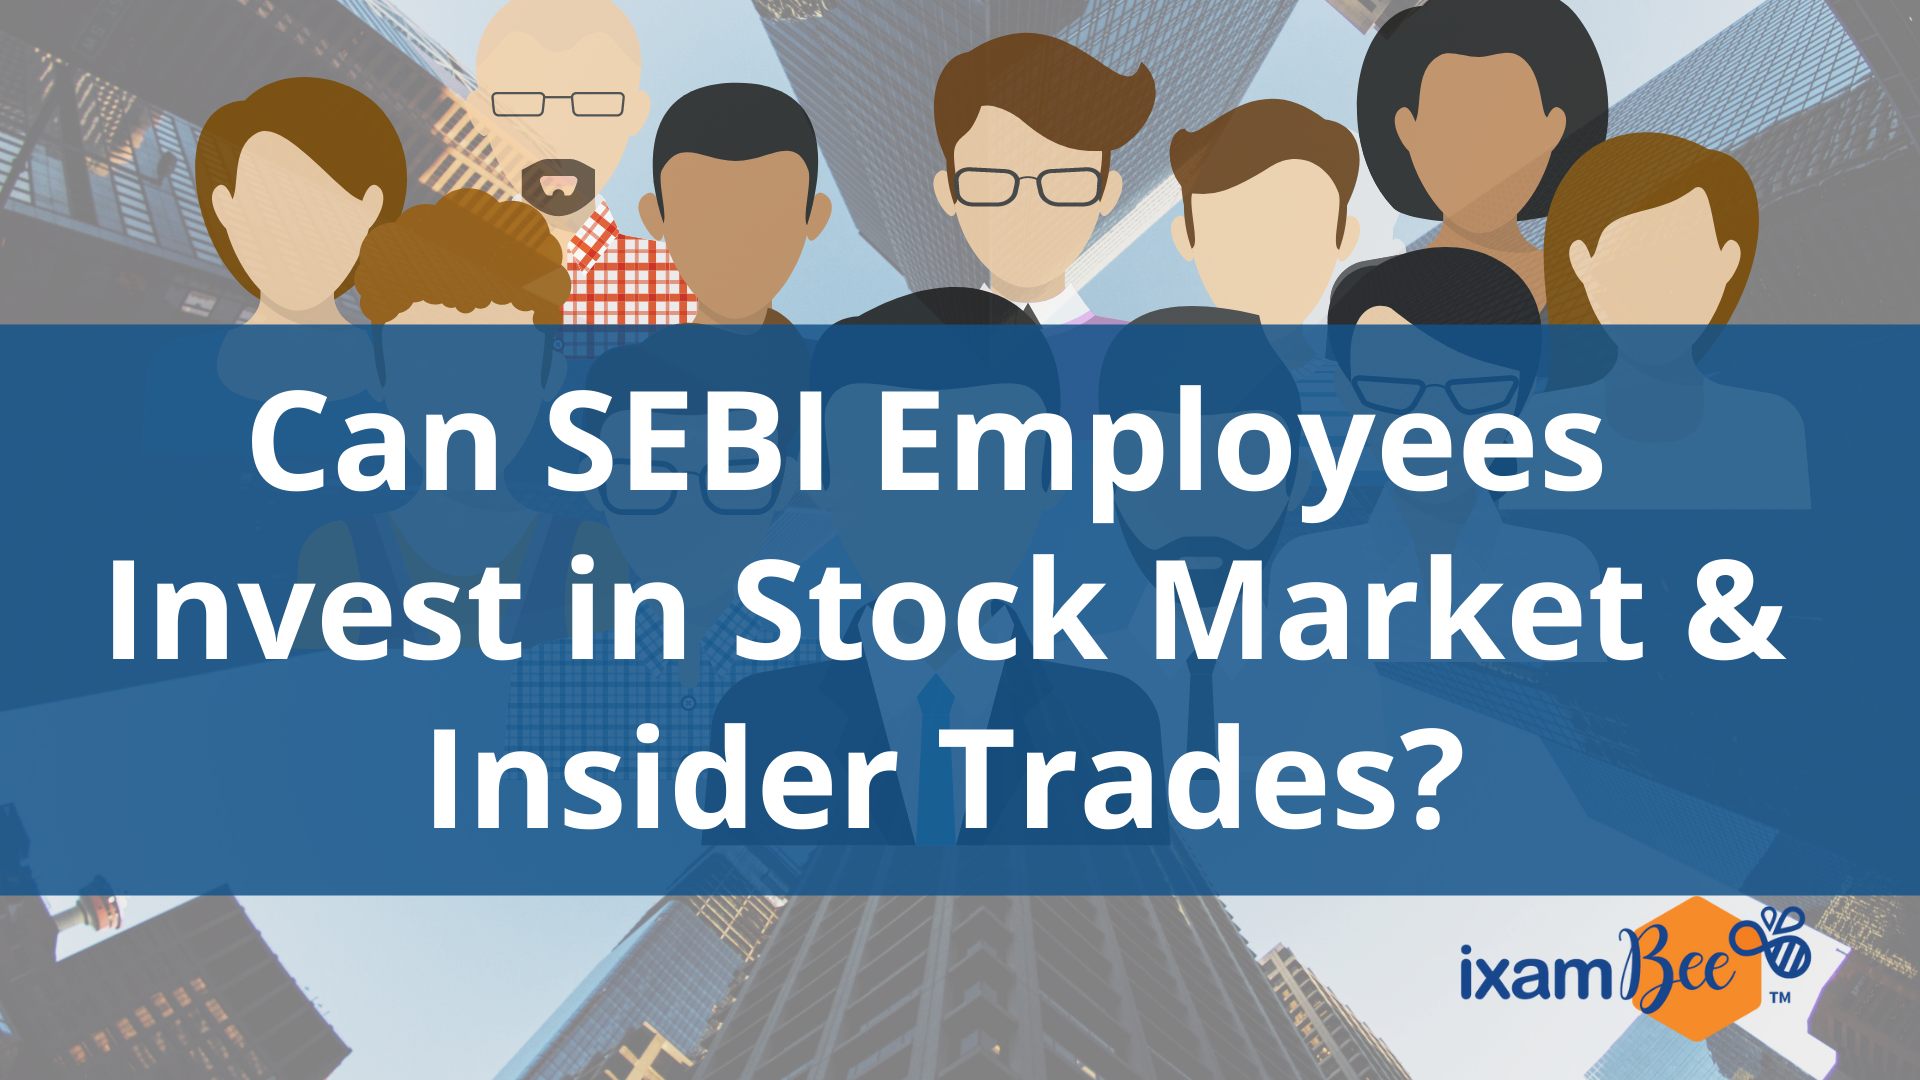 Are SEBI Employees Allowed to Trade?